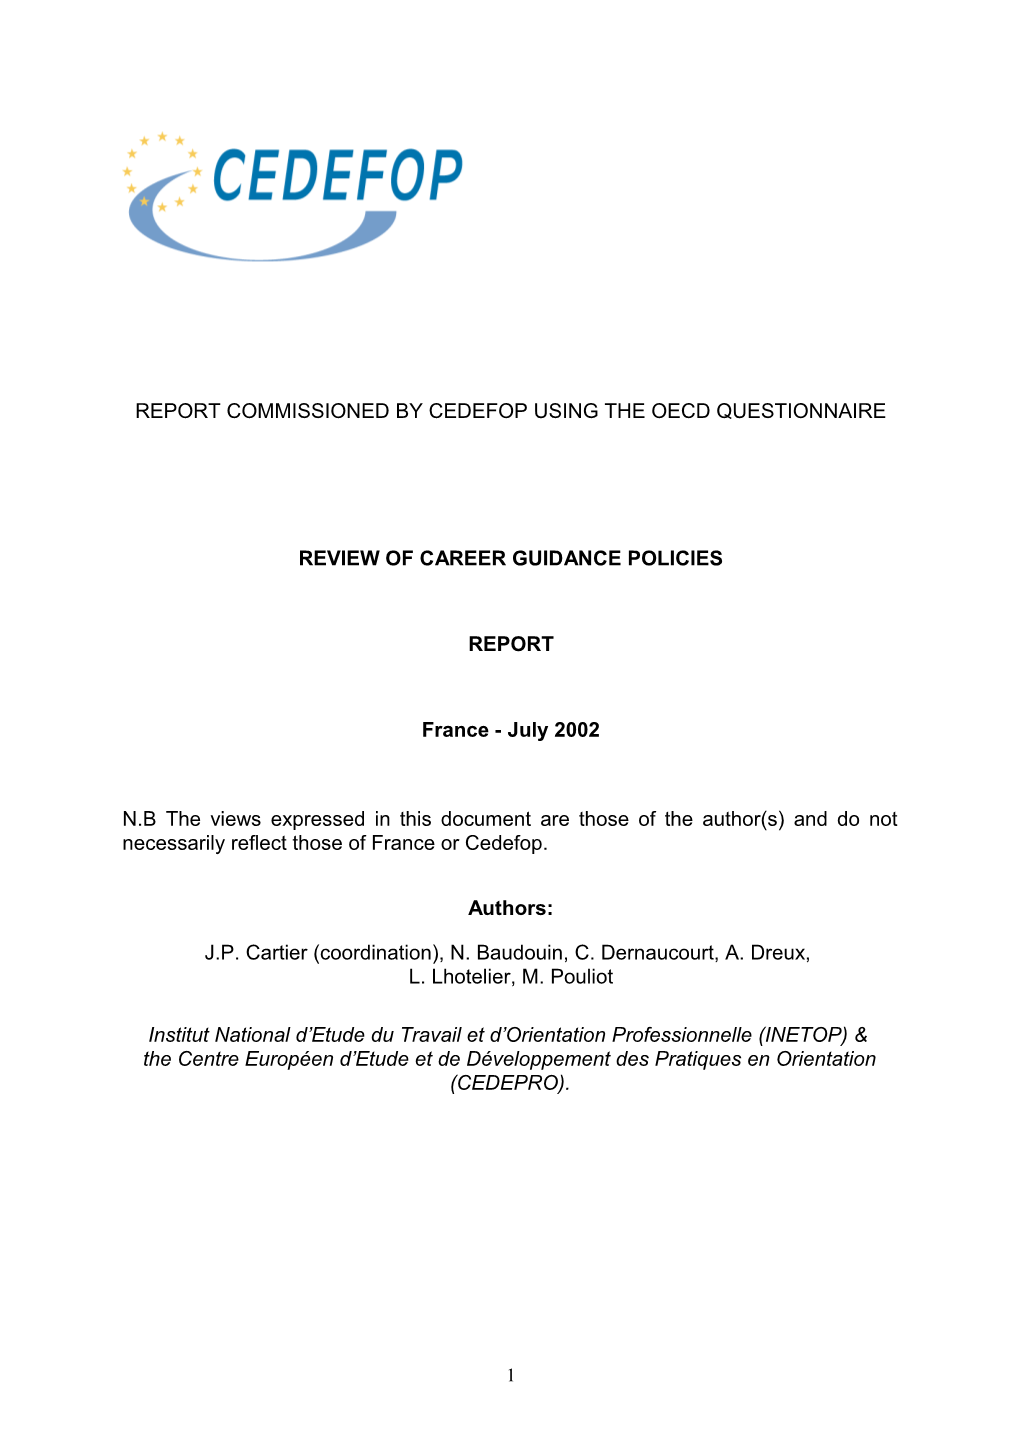 Report Commissioned by Cedefop Using the Oecd Questionnaire